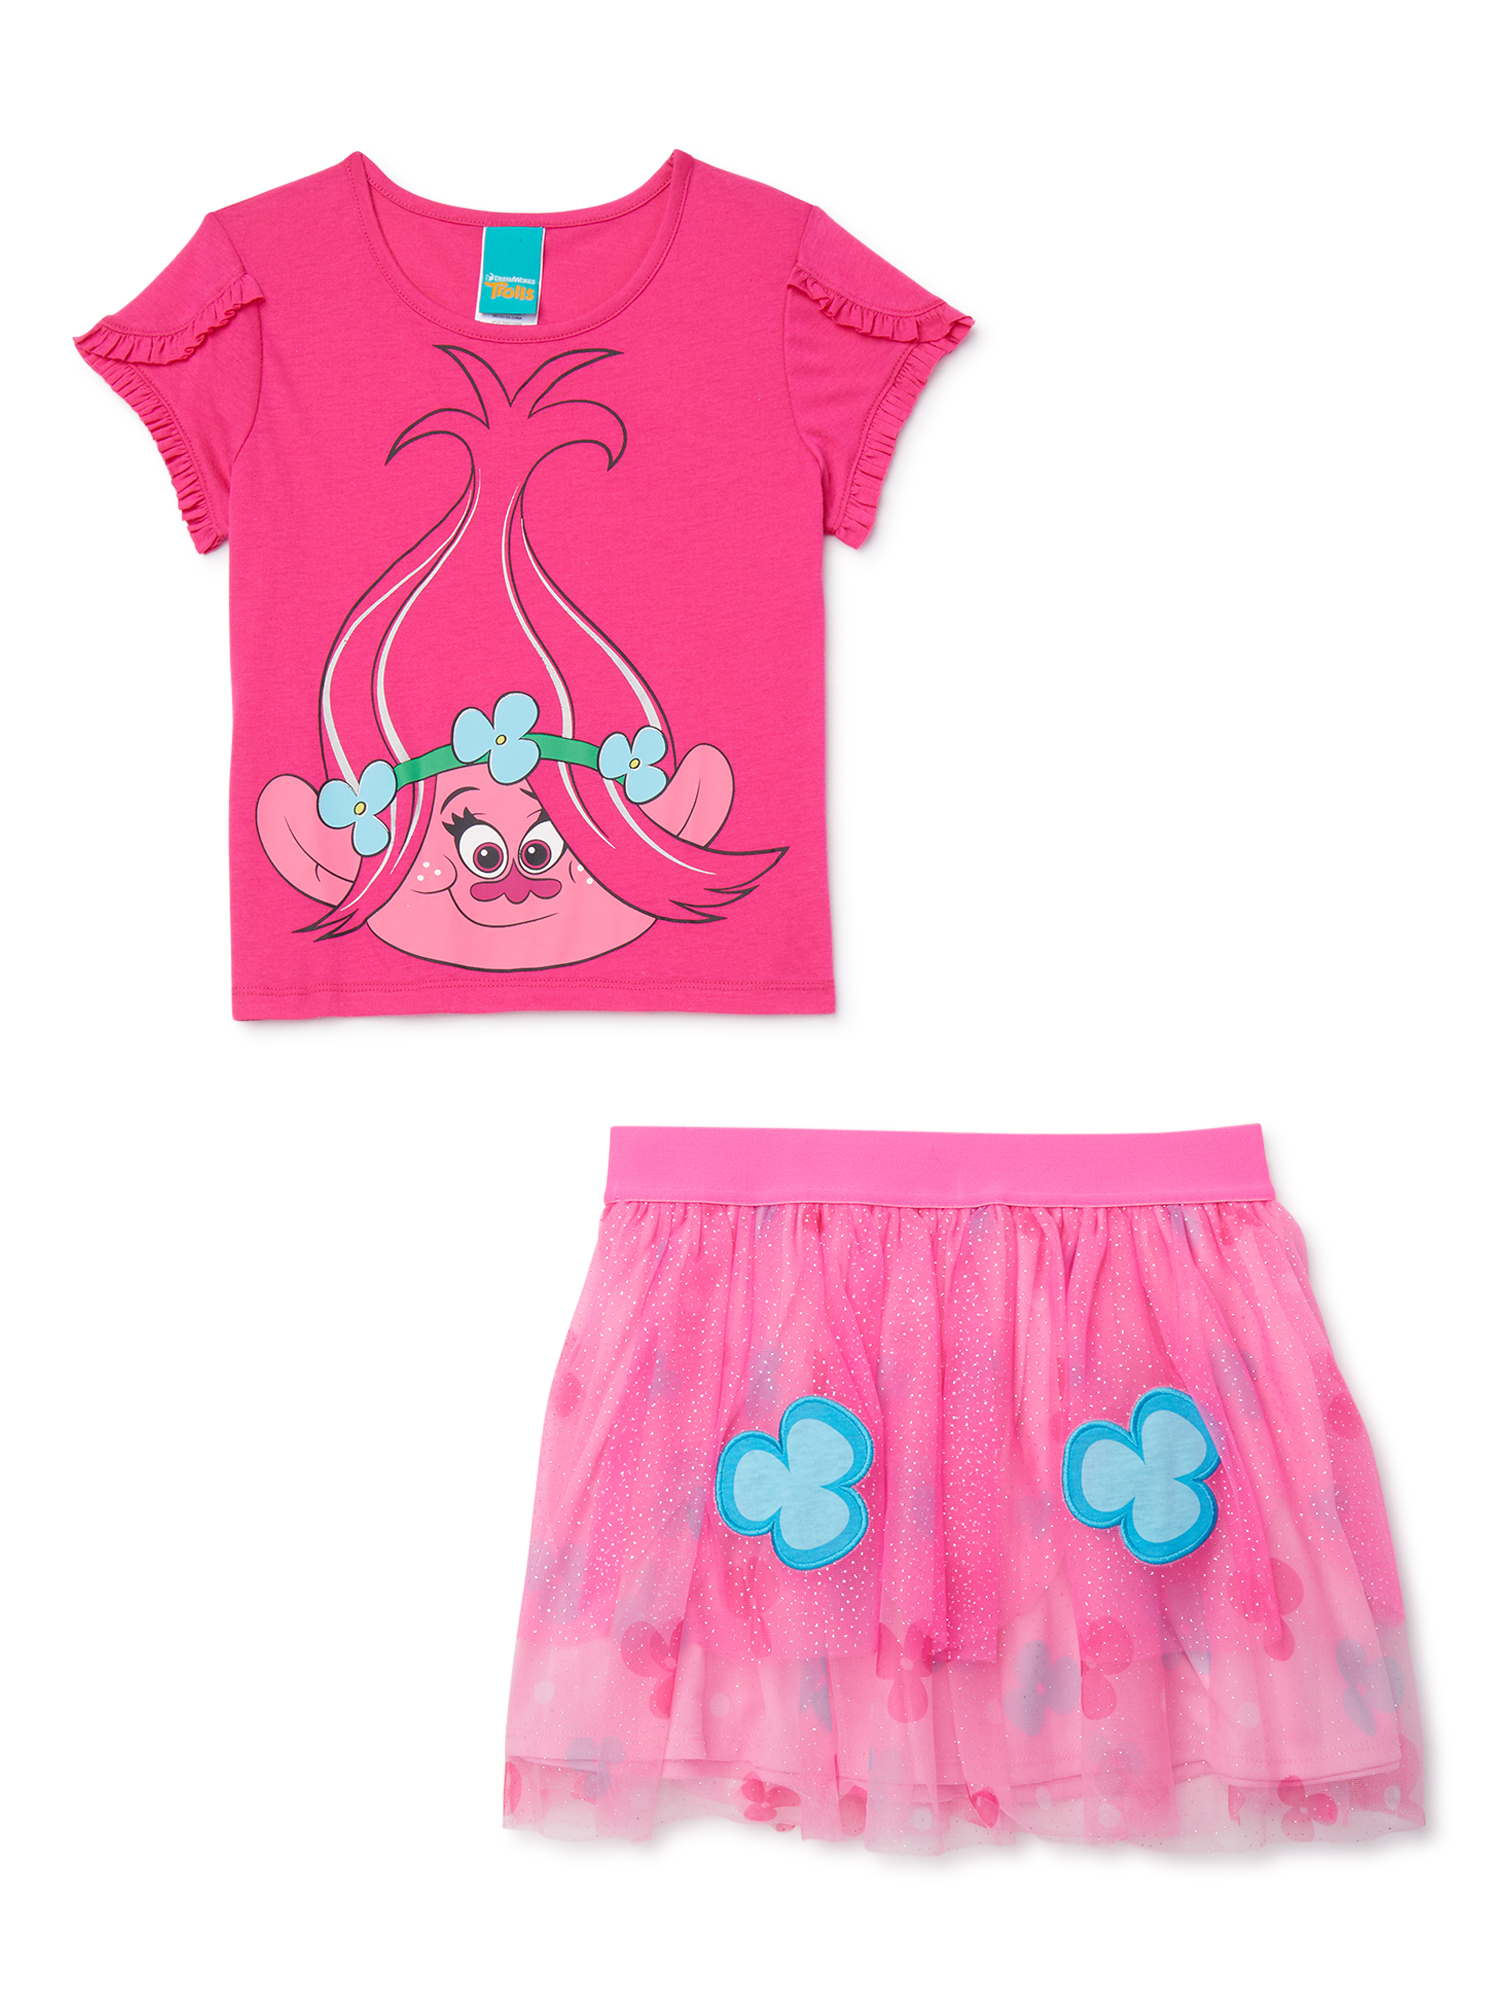 Trolls Girls 4-18 Poppy Exclusive Cosplay Top and Tutu Skirt, 2-Piece Outfit Set - image 1 of 3